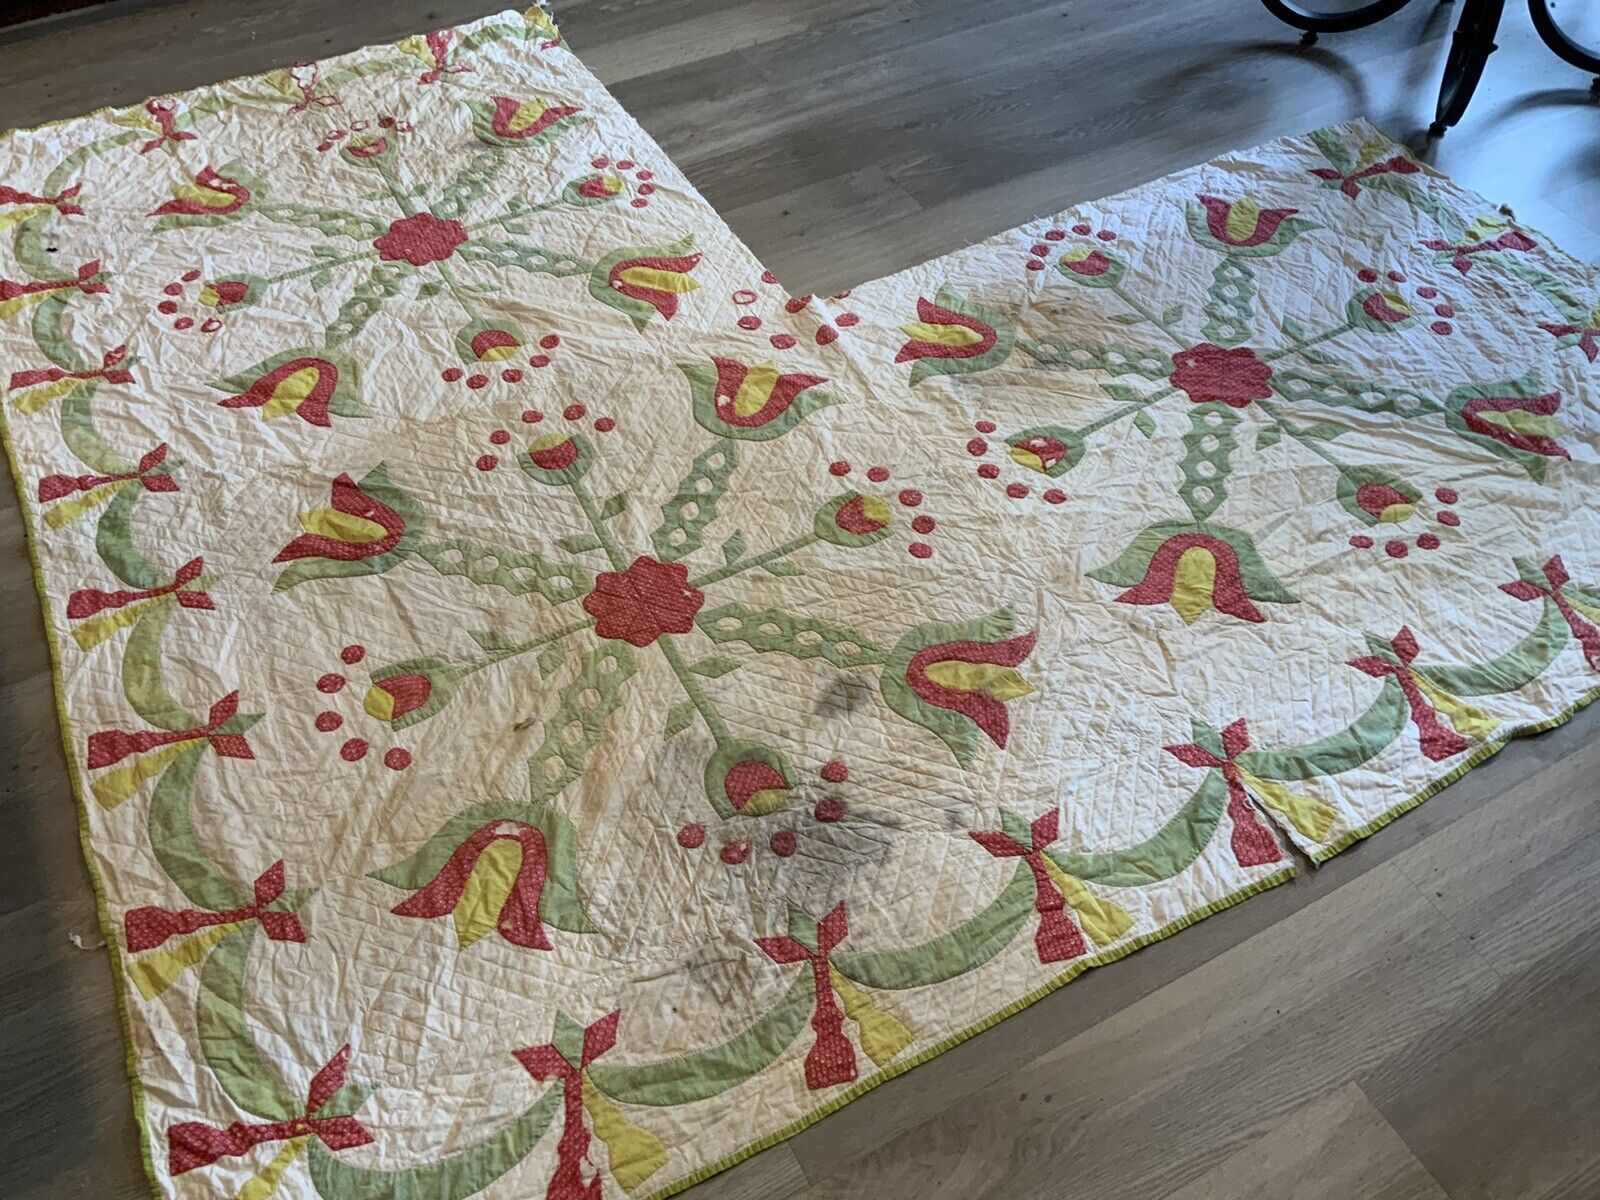 Antique Appliqué Flower & Leaf Quilt, 1880’s, Red, Yellow, Green, Cutter, As Is